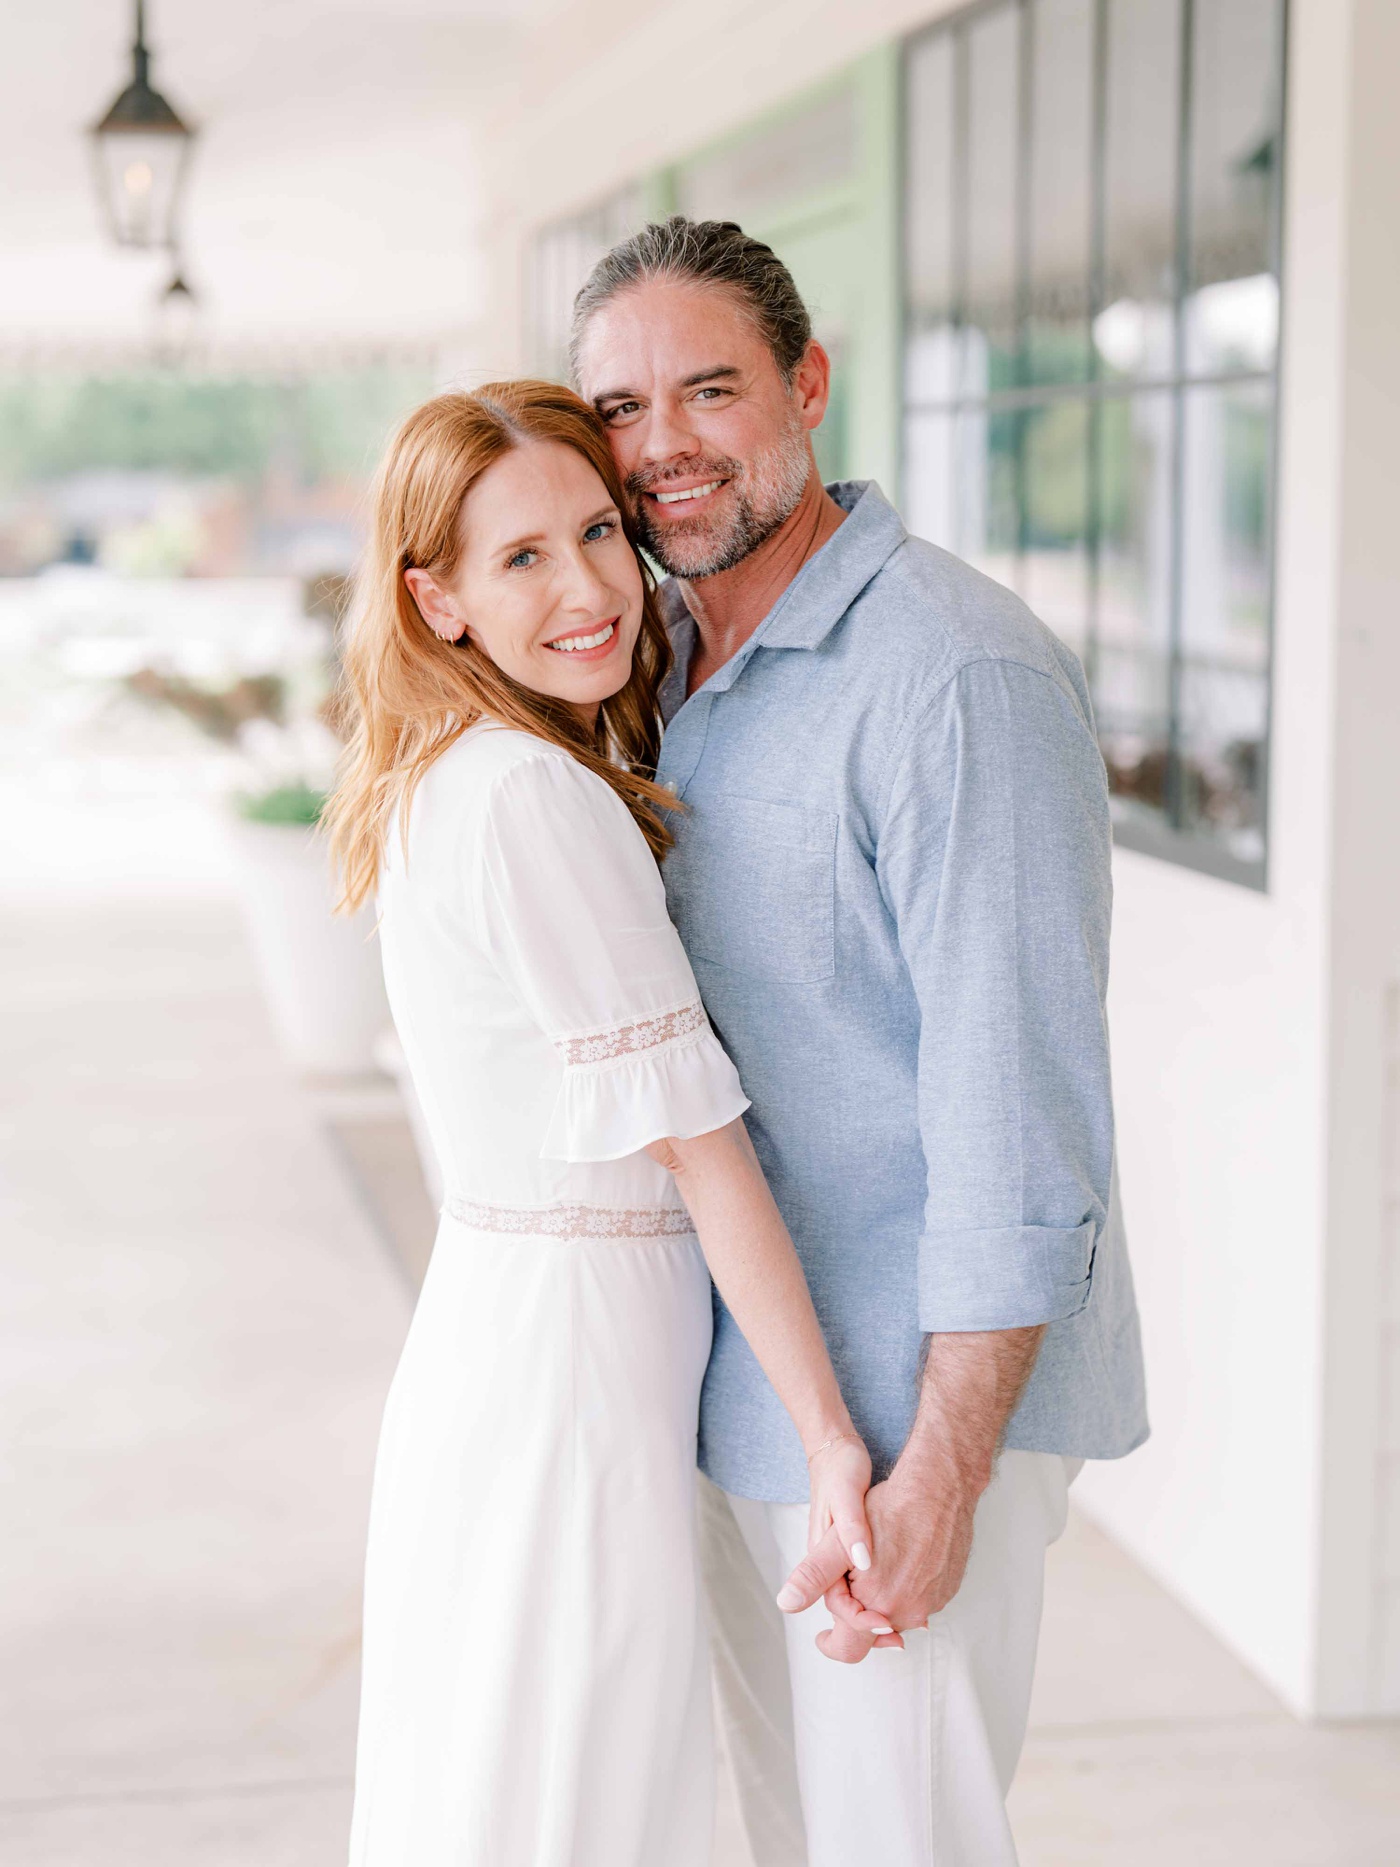 Oklahoma City engagement session locations